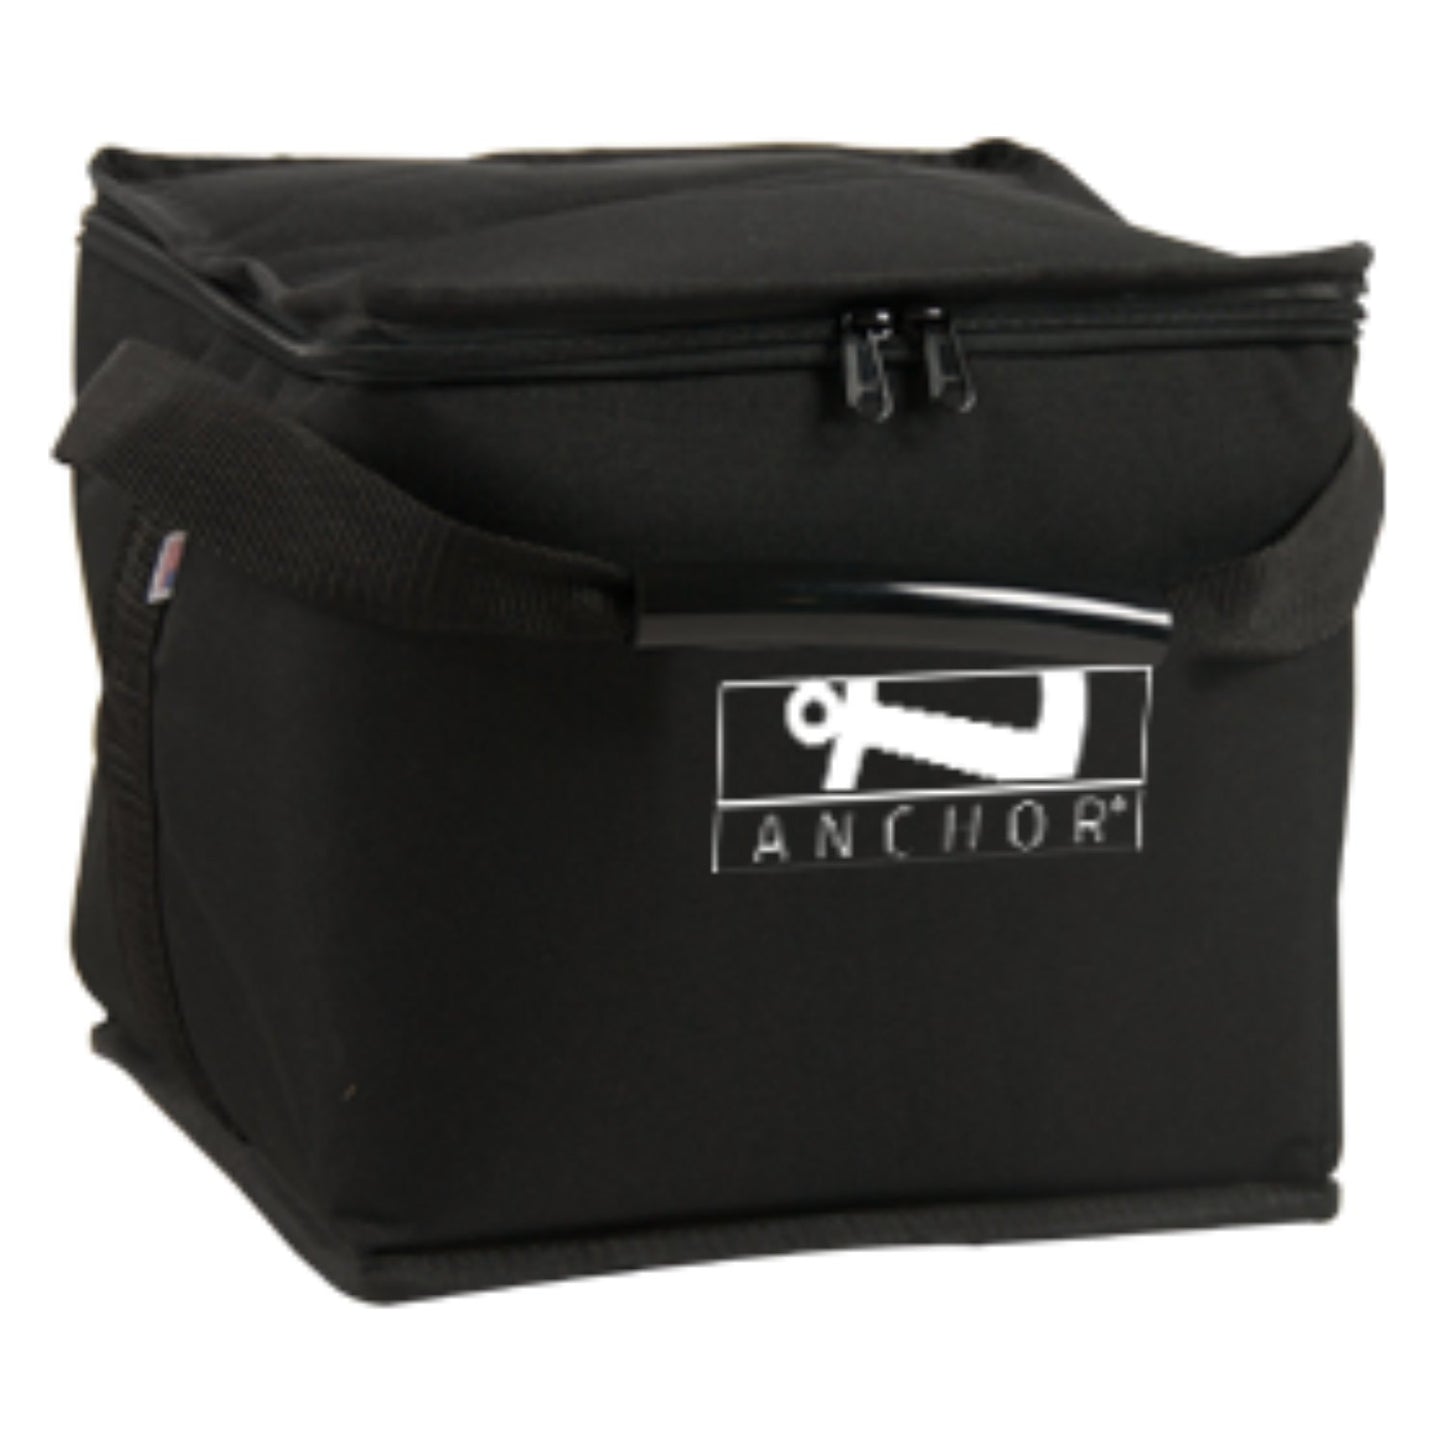 Extra Large Carrying Bag for AN-Series and Accessories